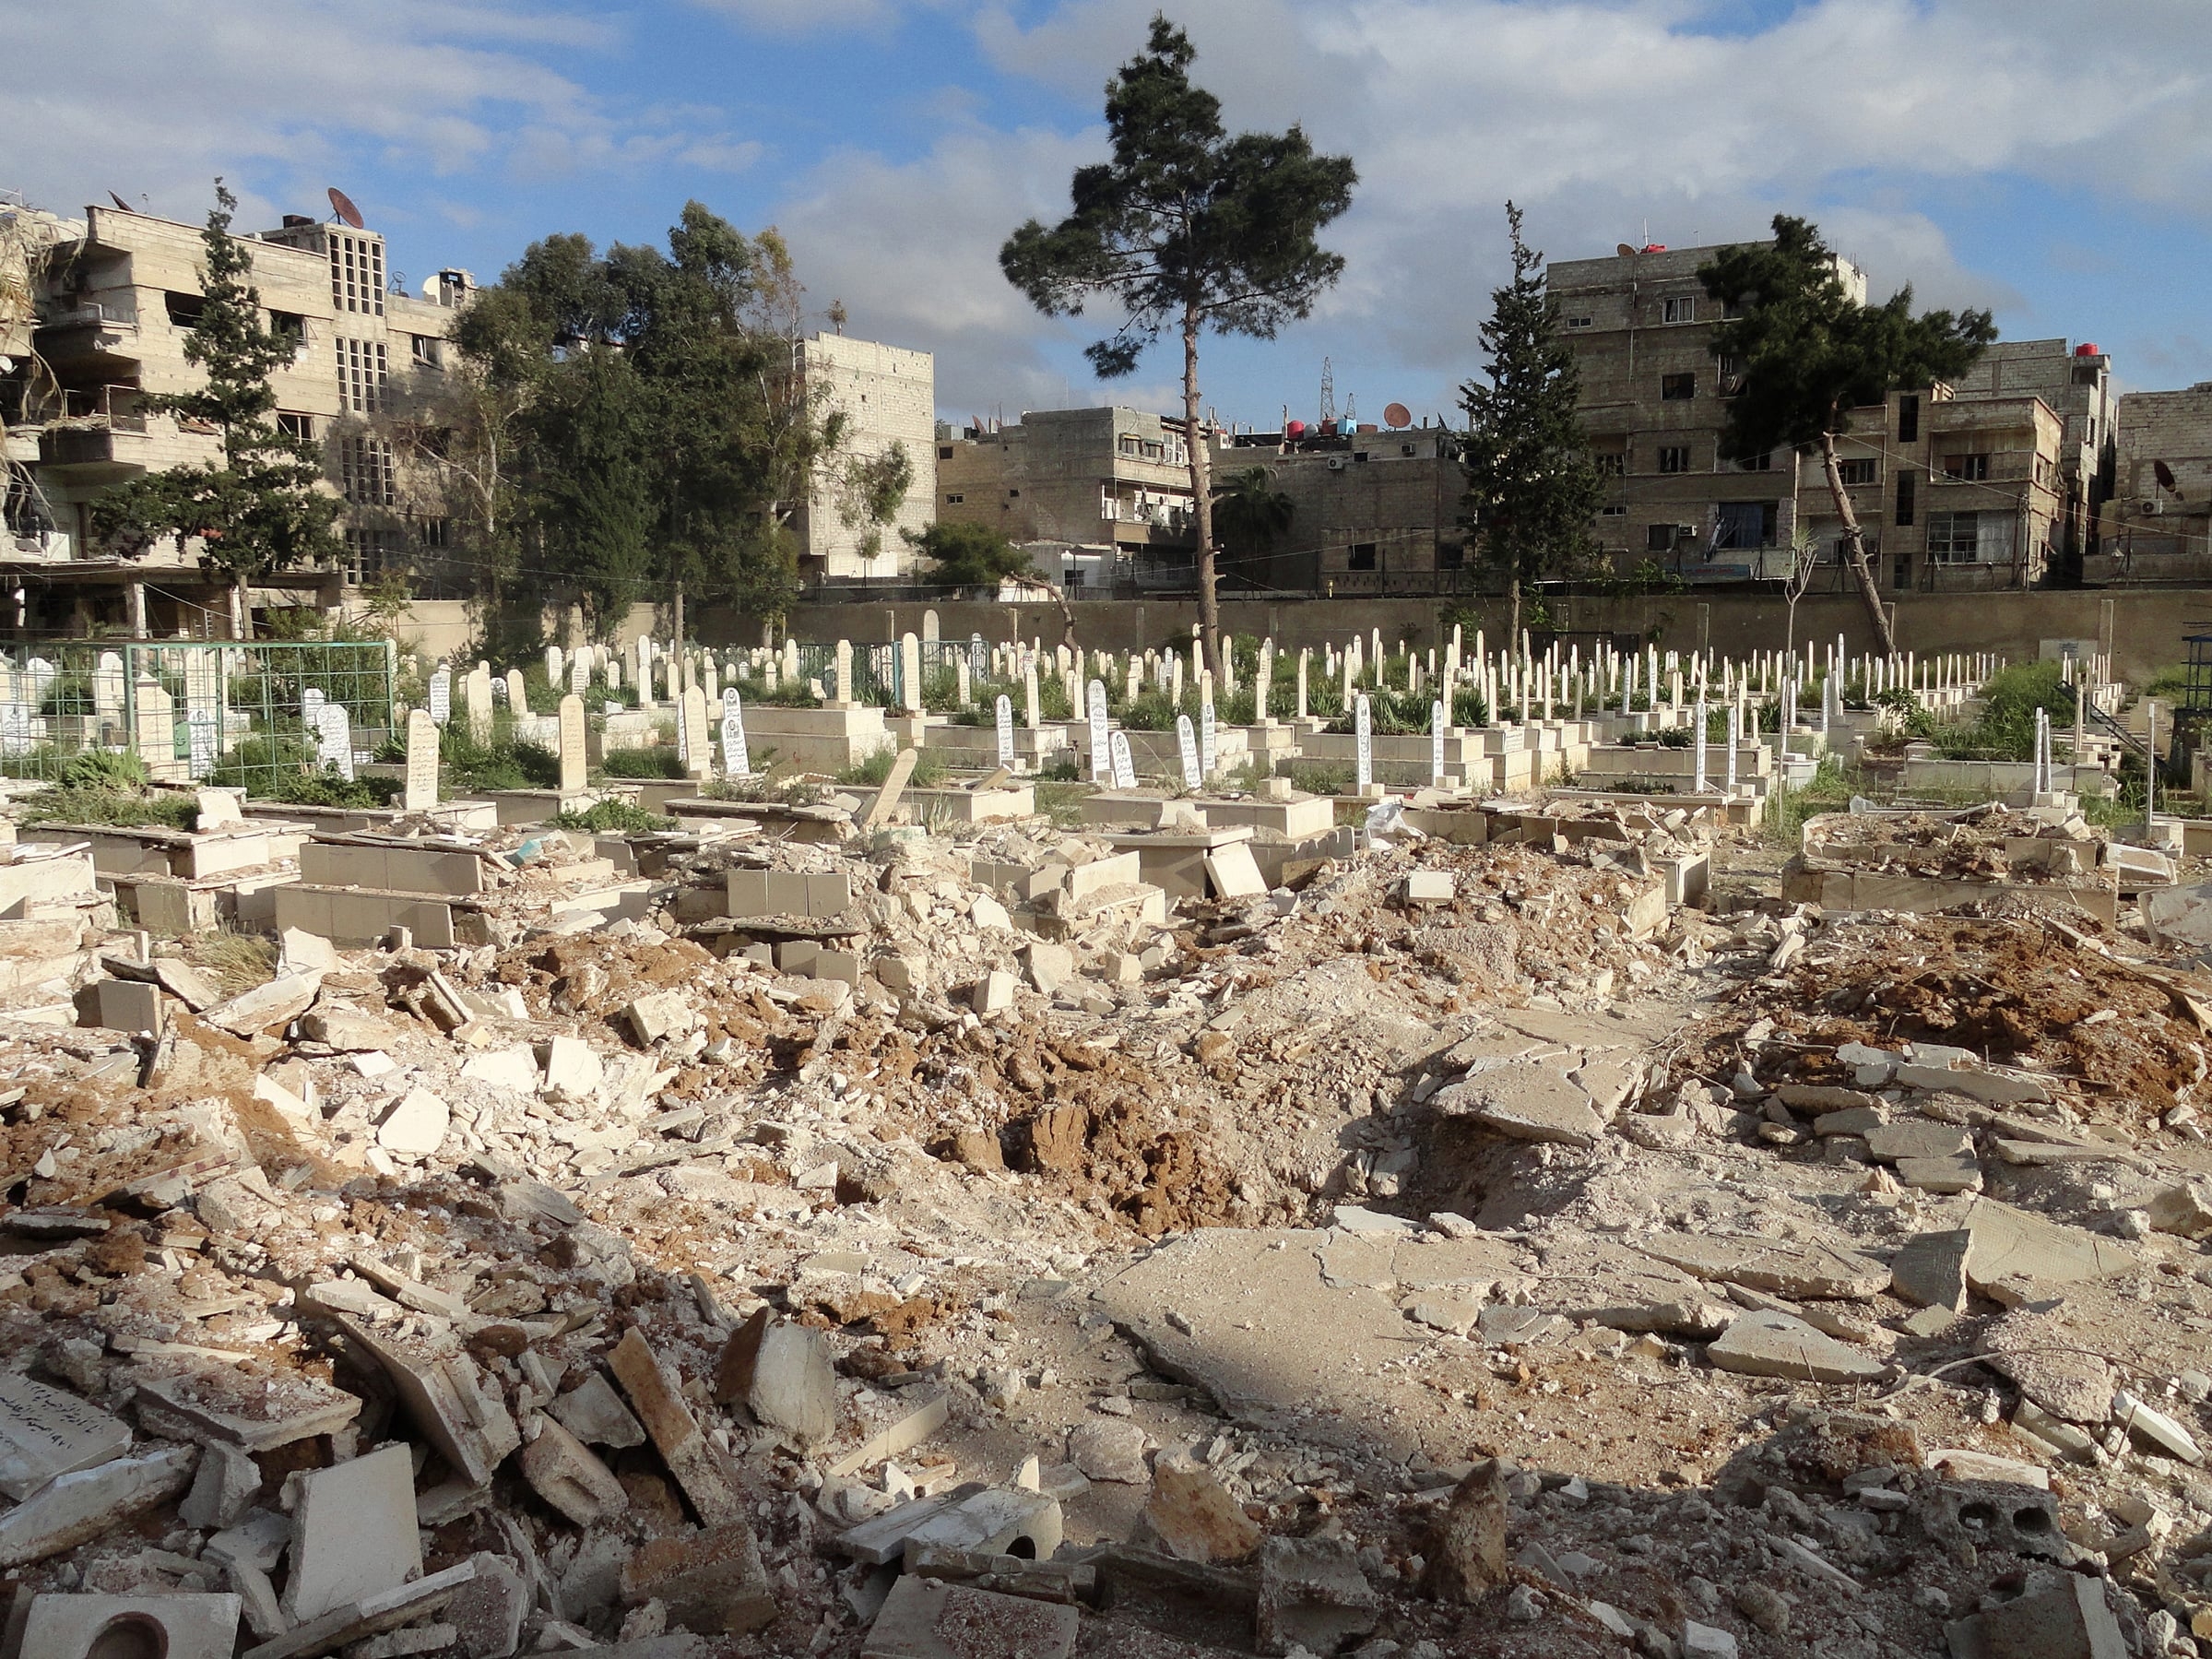 A picture taken on 11 April 2015, shows the damage inflicted upon a cemetery, following a reported barrel bomb attack by Syrian government forces, in the Yarmuk Palestinian refugee camp in the Syrian capital Damascus (RAMI AL-SAYED / AFP)